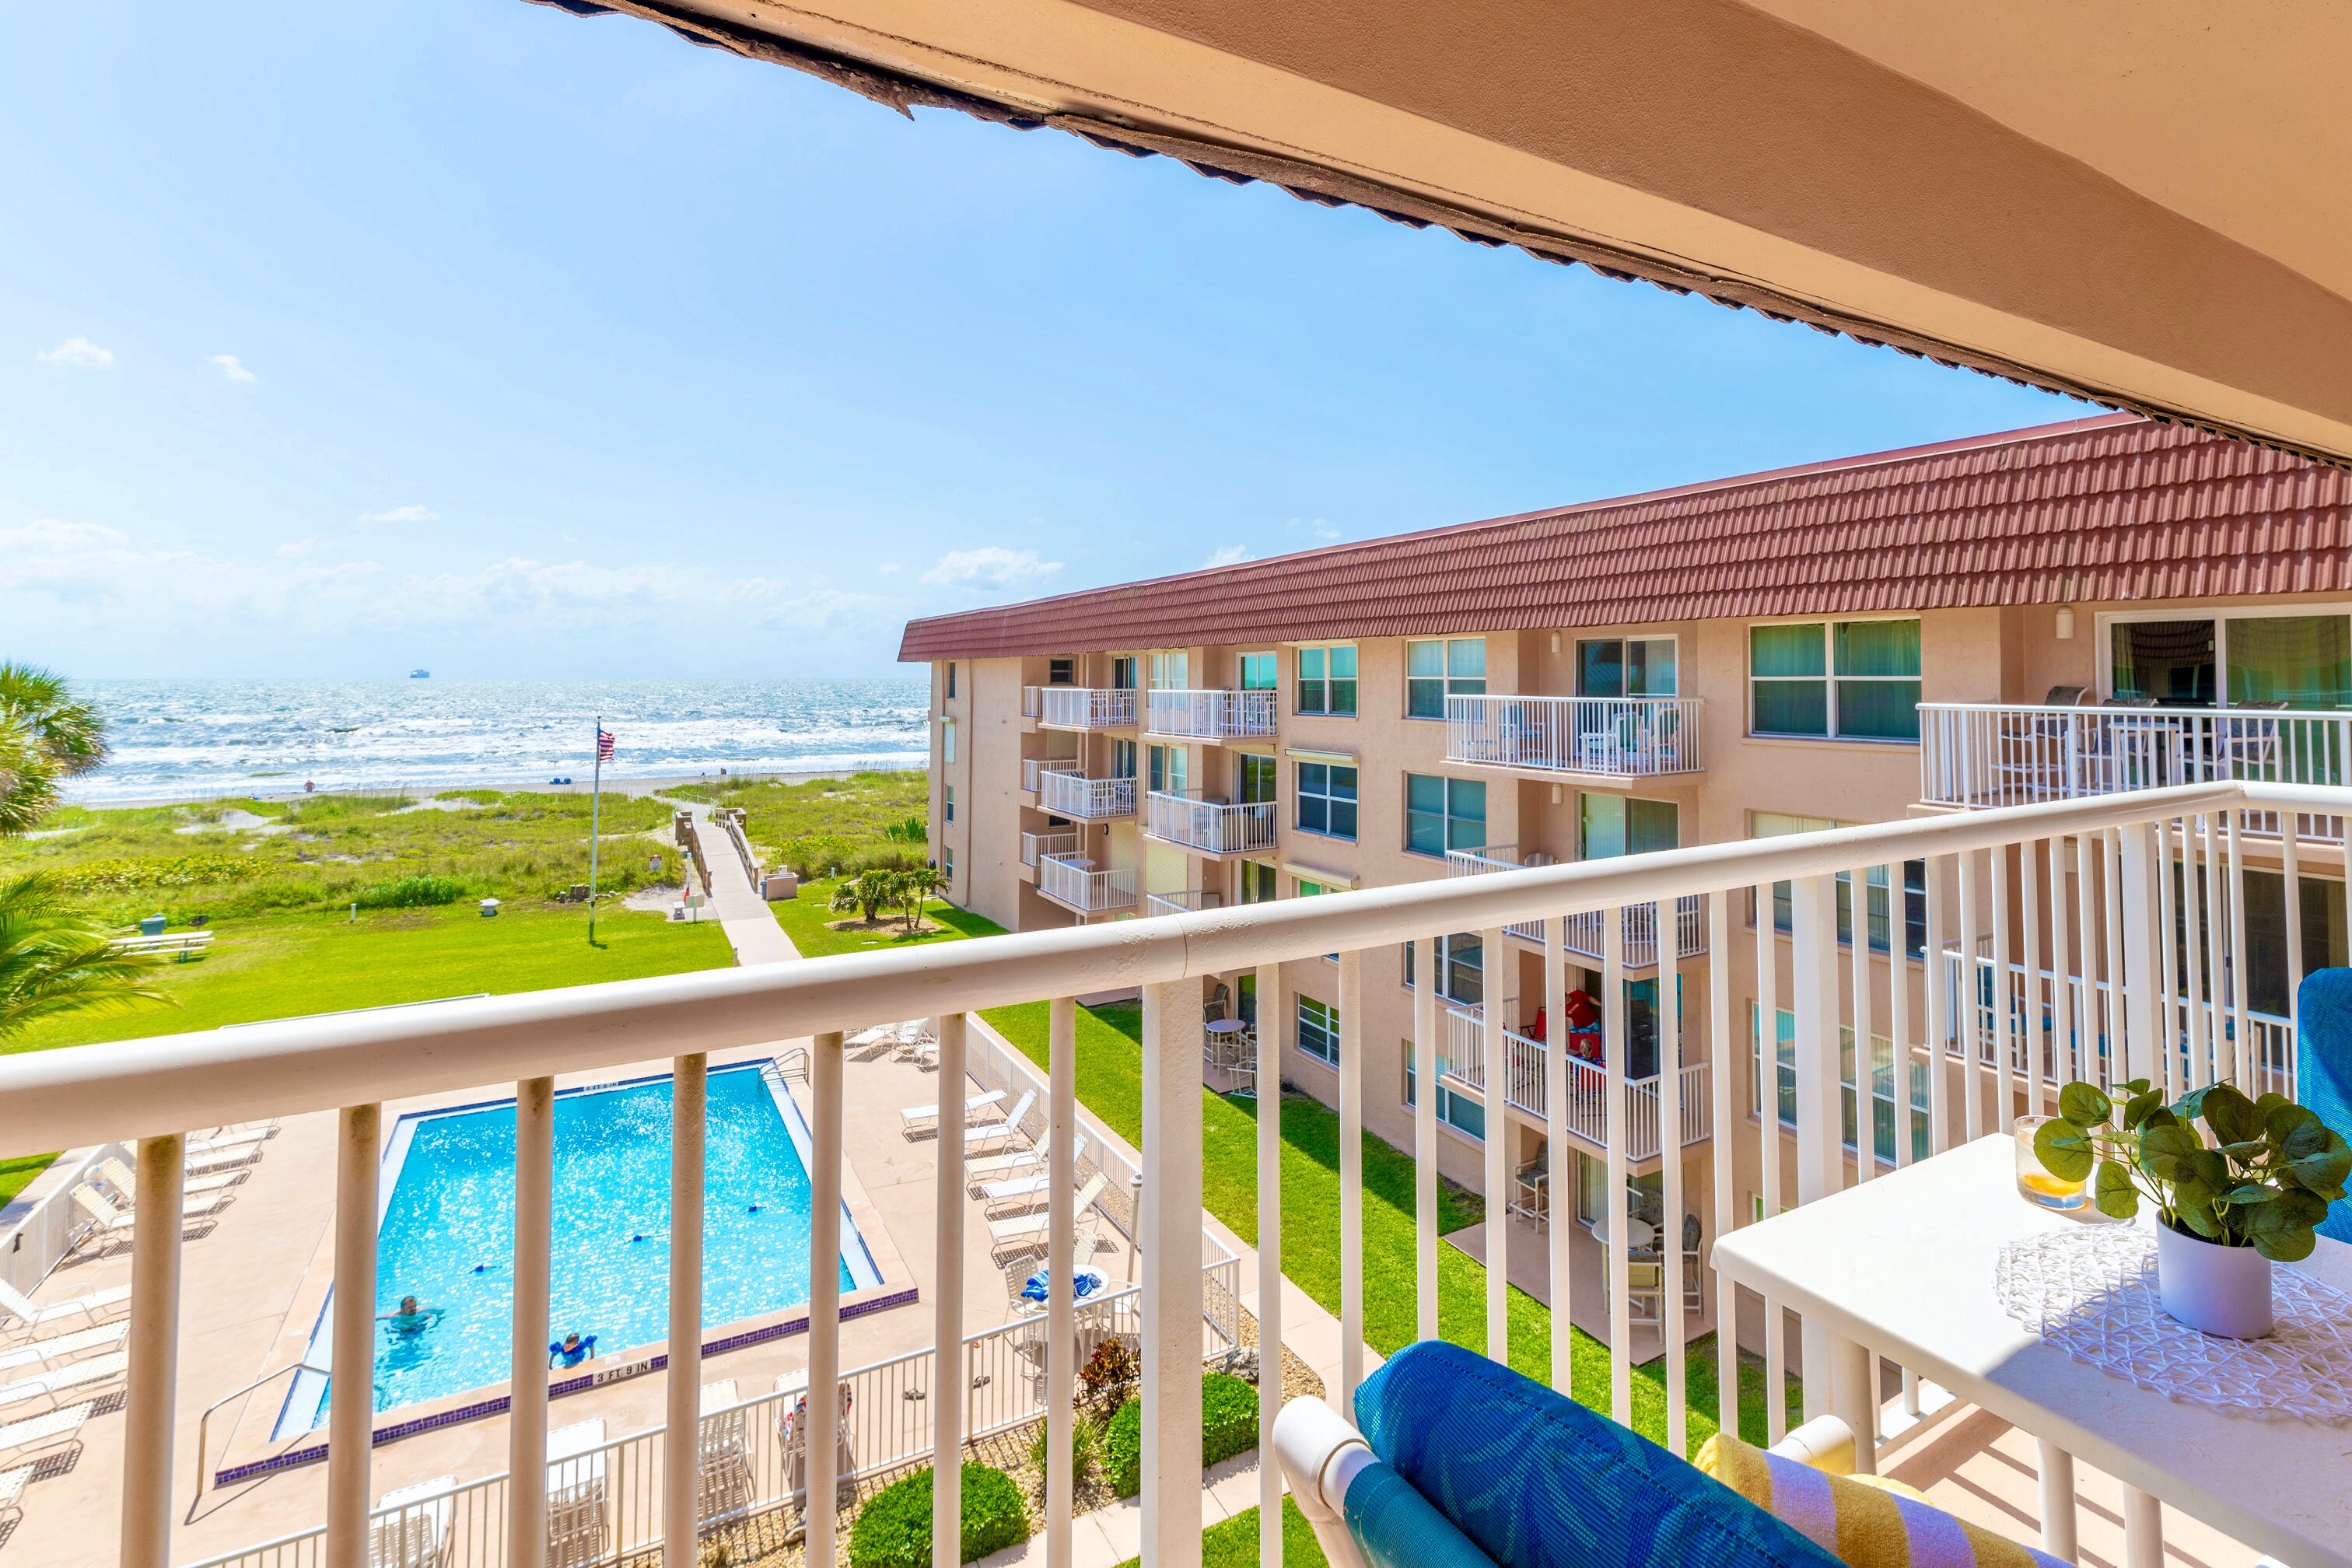 Enjoy a coffee or drink from your beautiful ocean facing balcony.